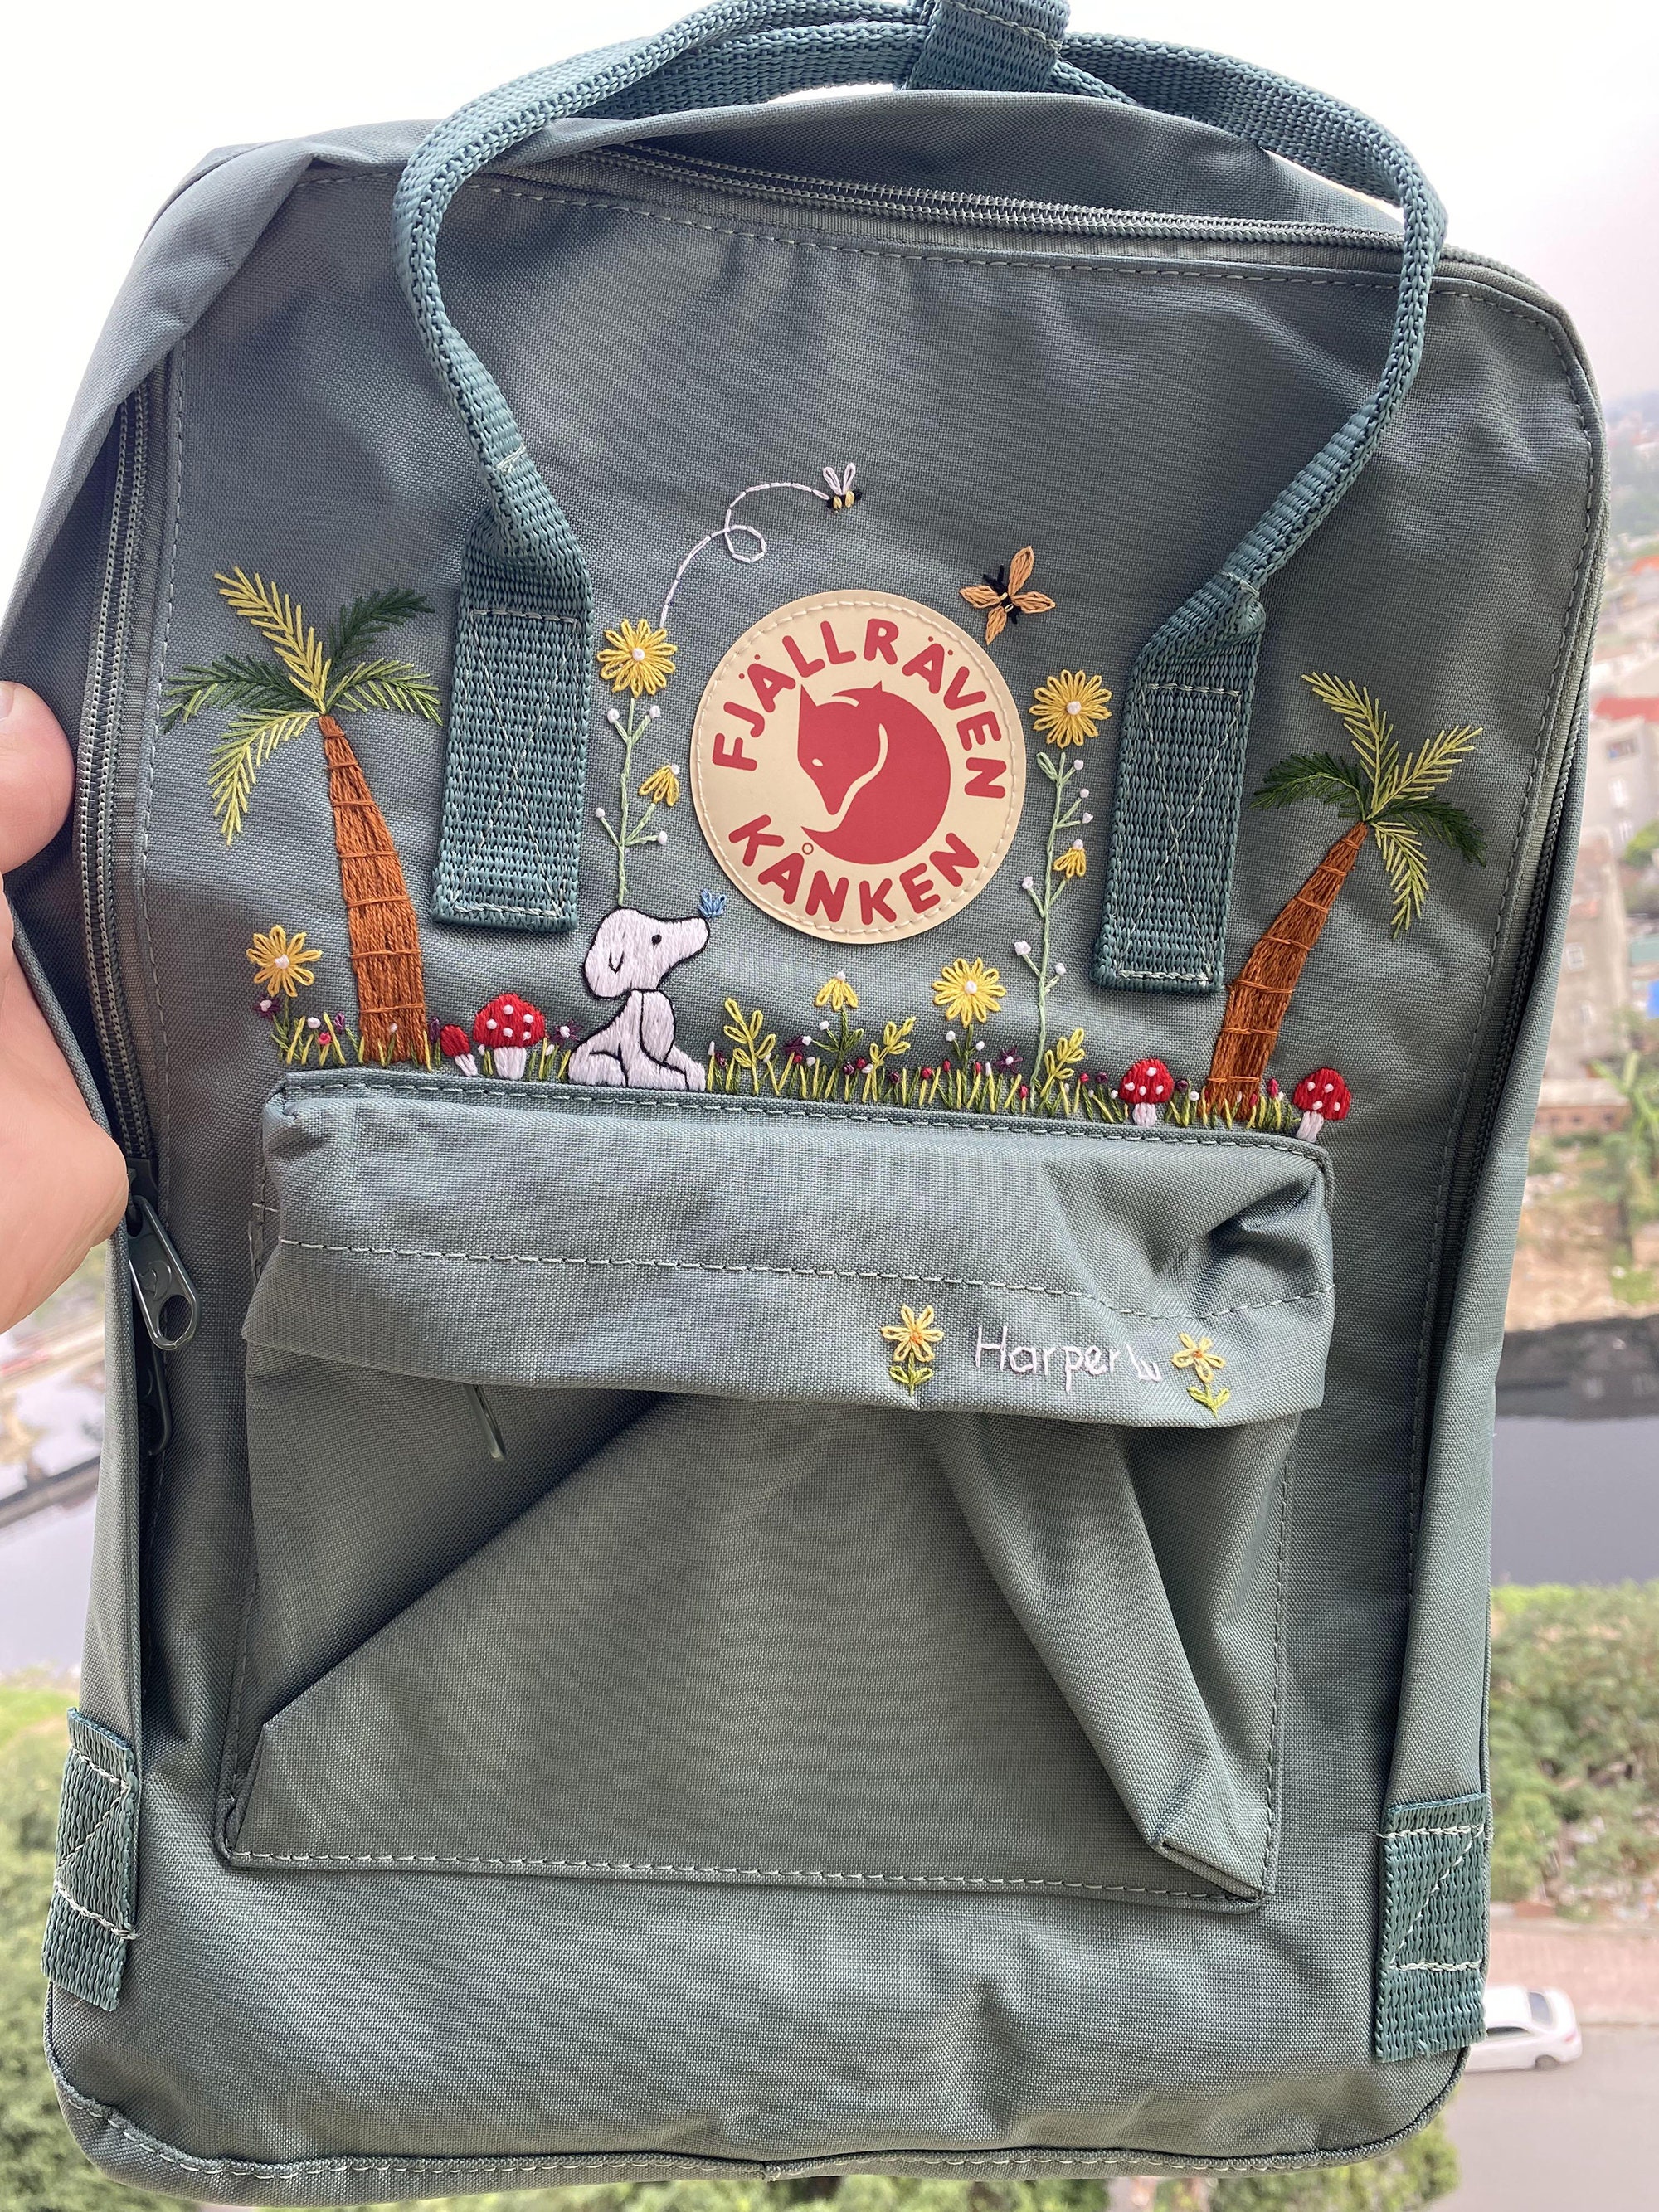 Embroidered Kanken Mini Backpack, Fjallraven Kanken Hand Embroidery, Custom  Design and Color Choices, Stylish and Practical Backpack Purse